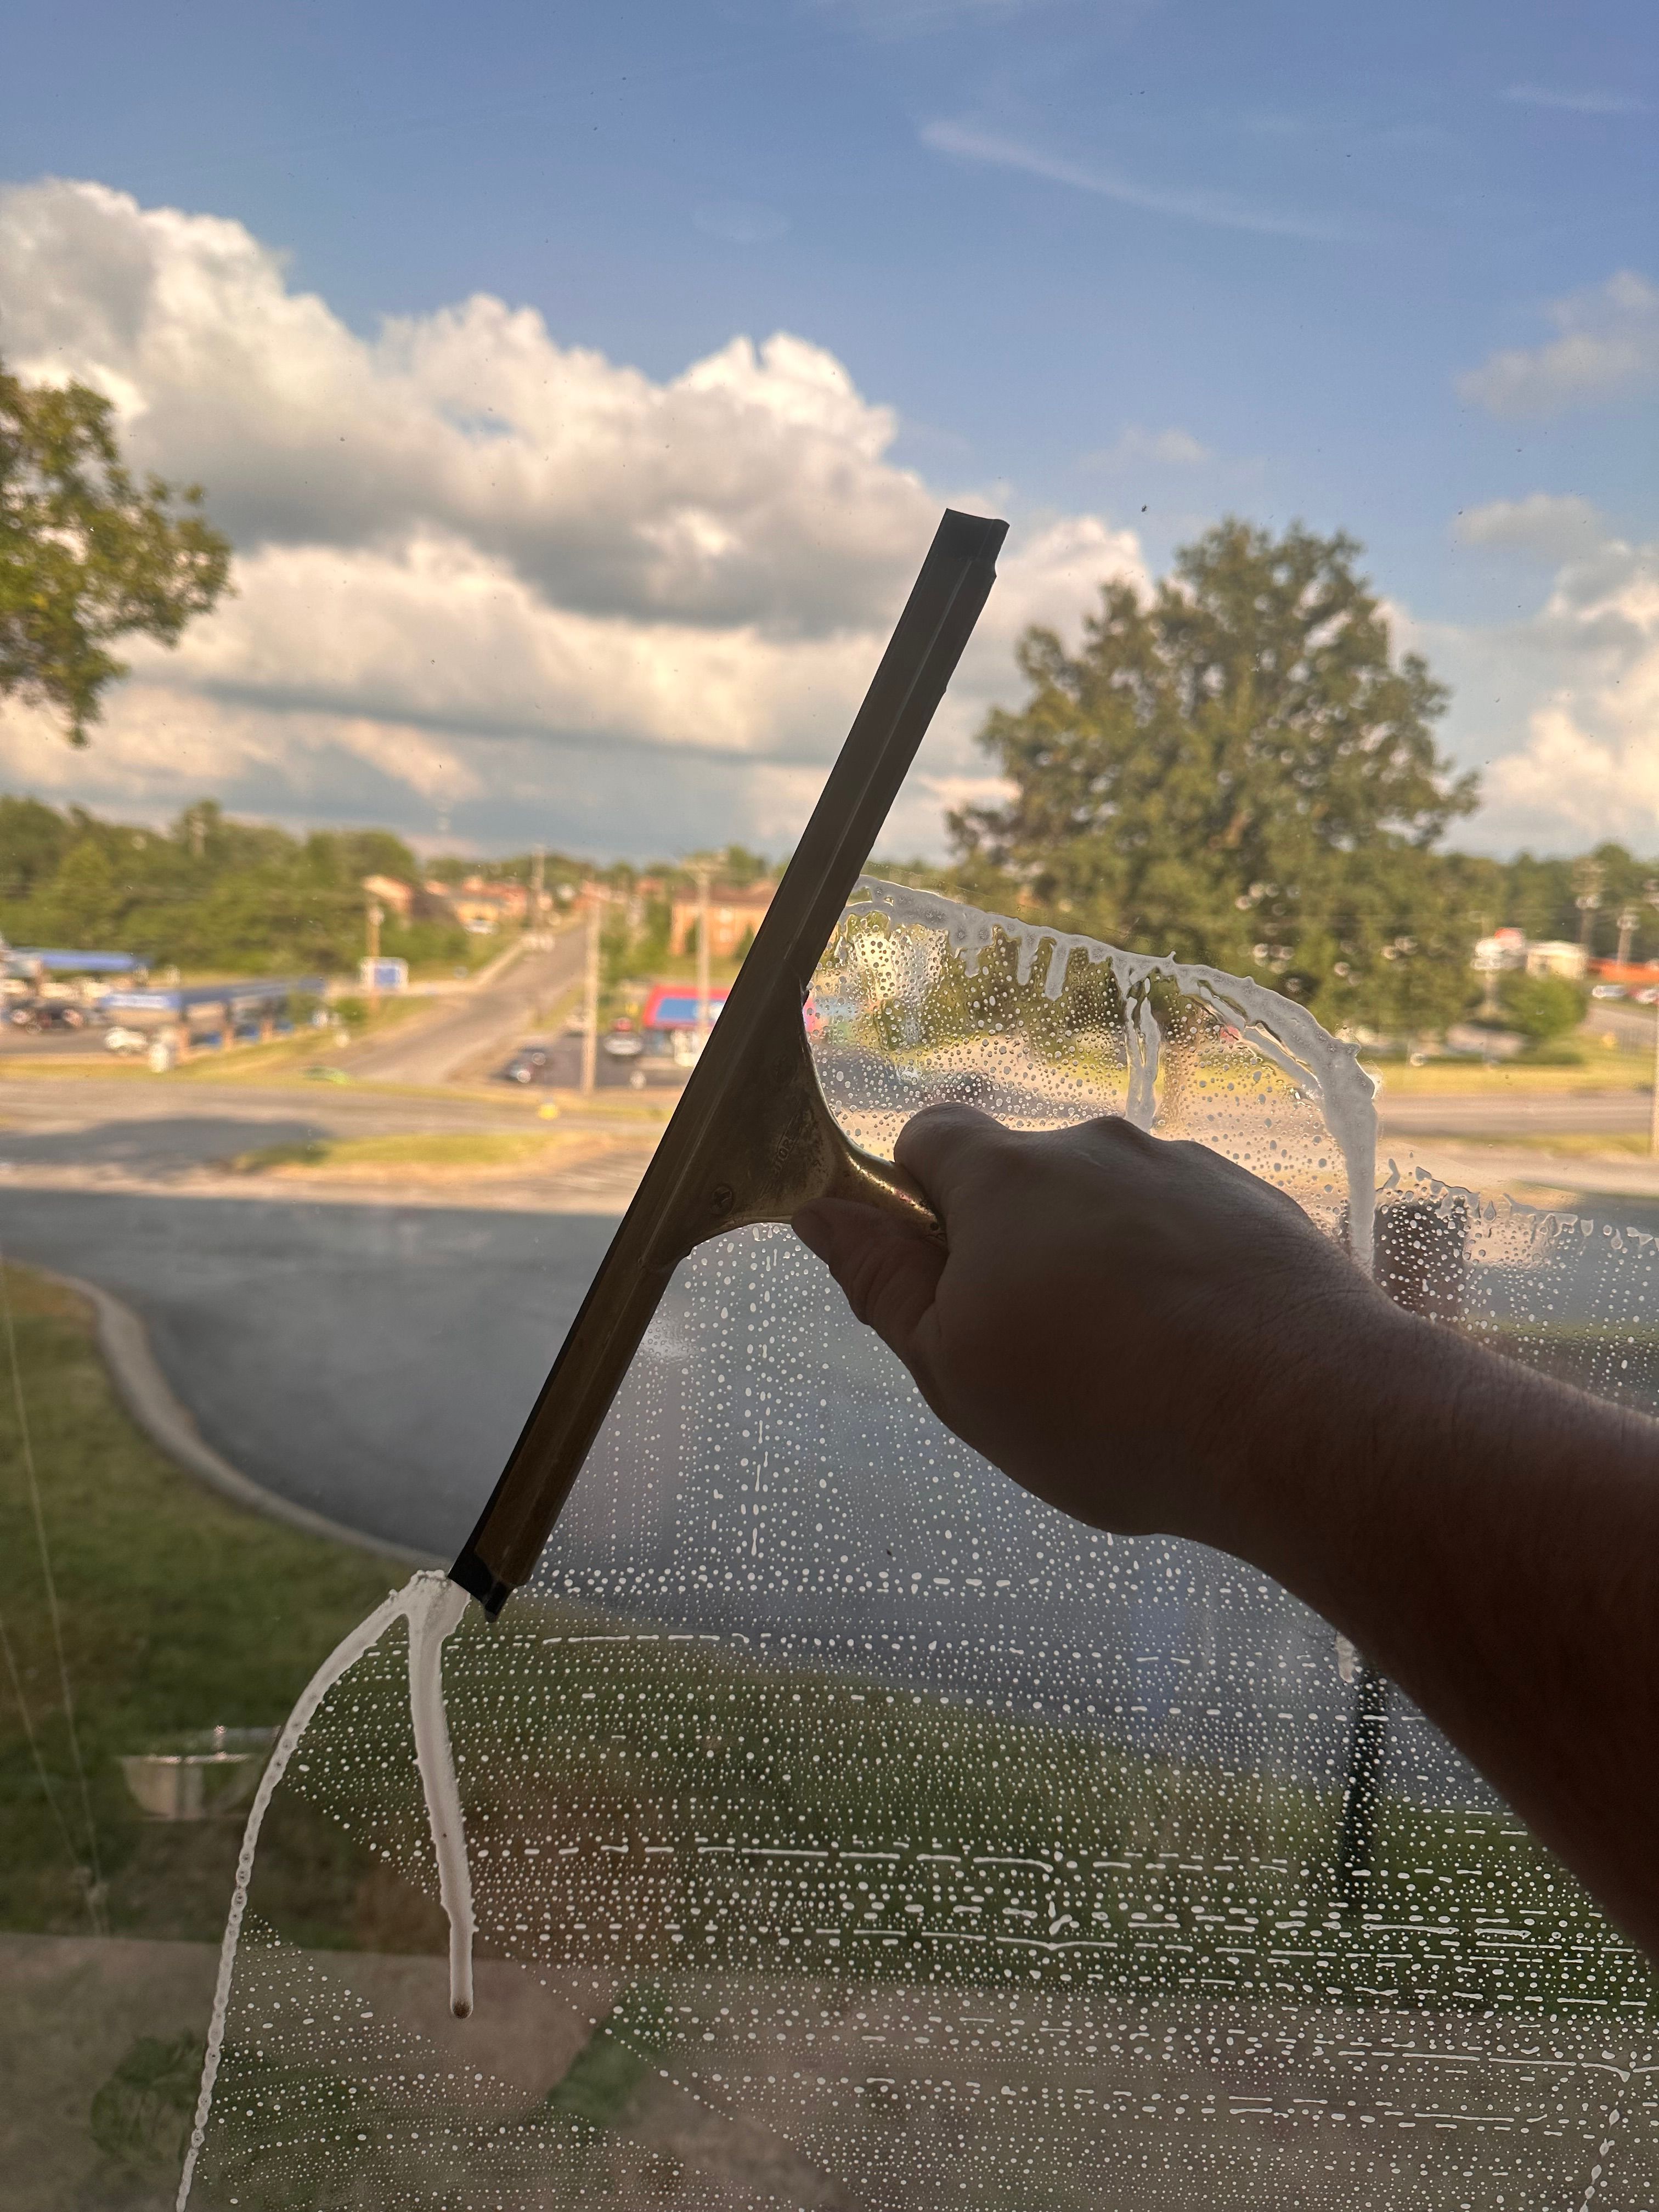 Window Cleaning for Weimer Cleaning Service in Charlotte, TN